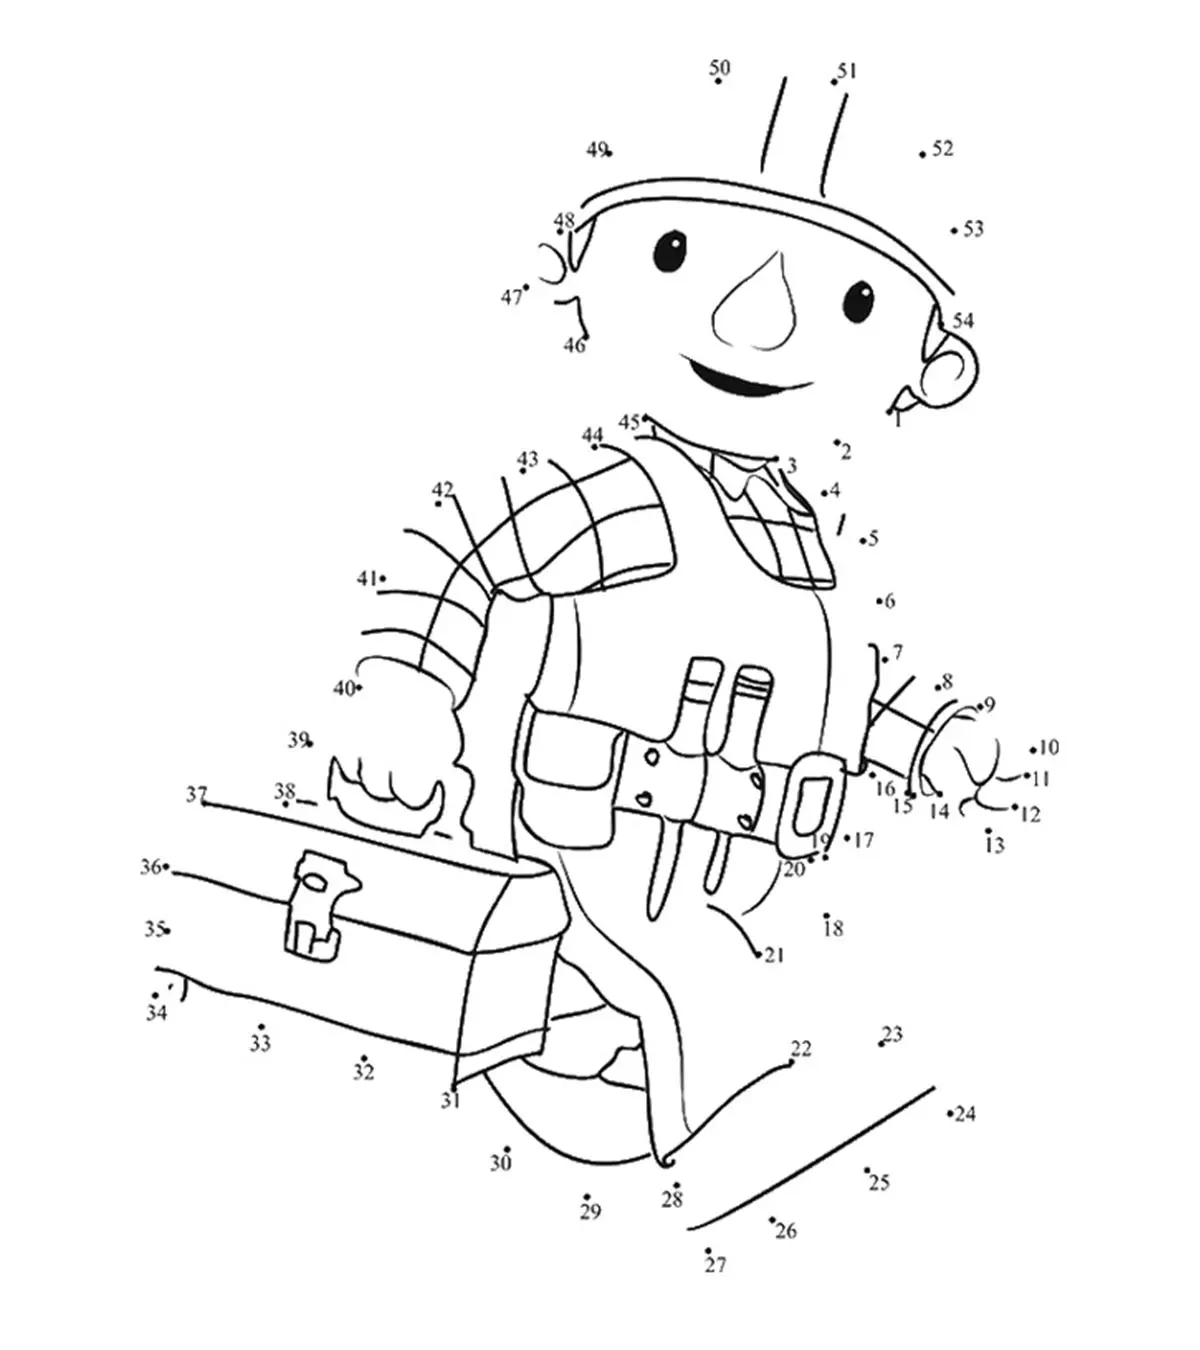 Top 10 Dot-To-Dot Coloring Pages Your Toddler Will Love To Join & Color_image